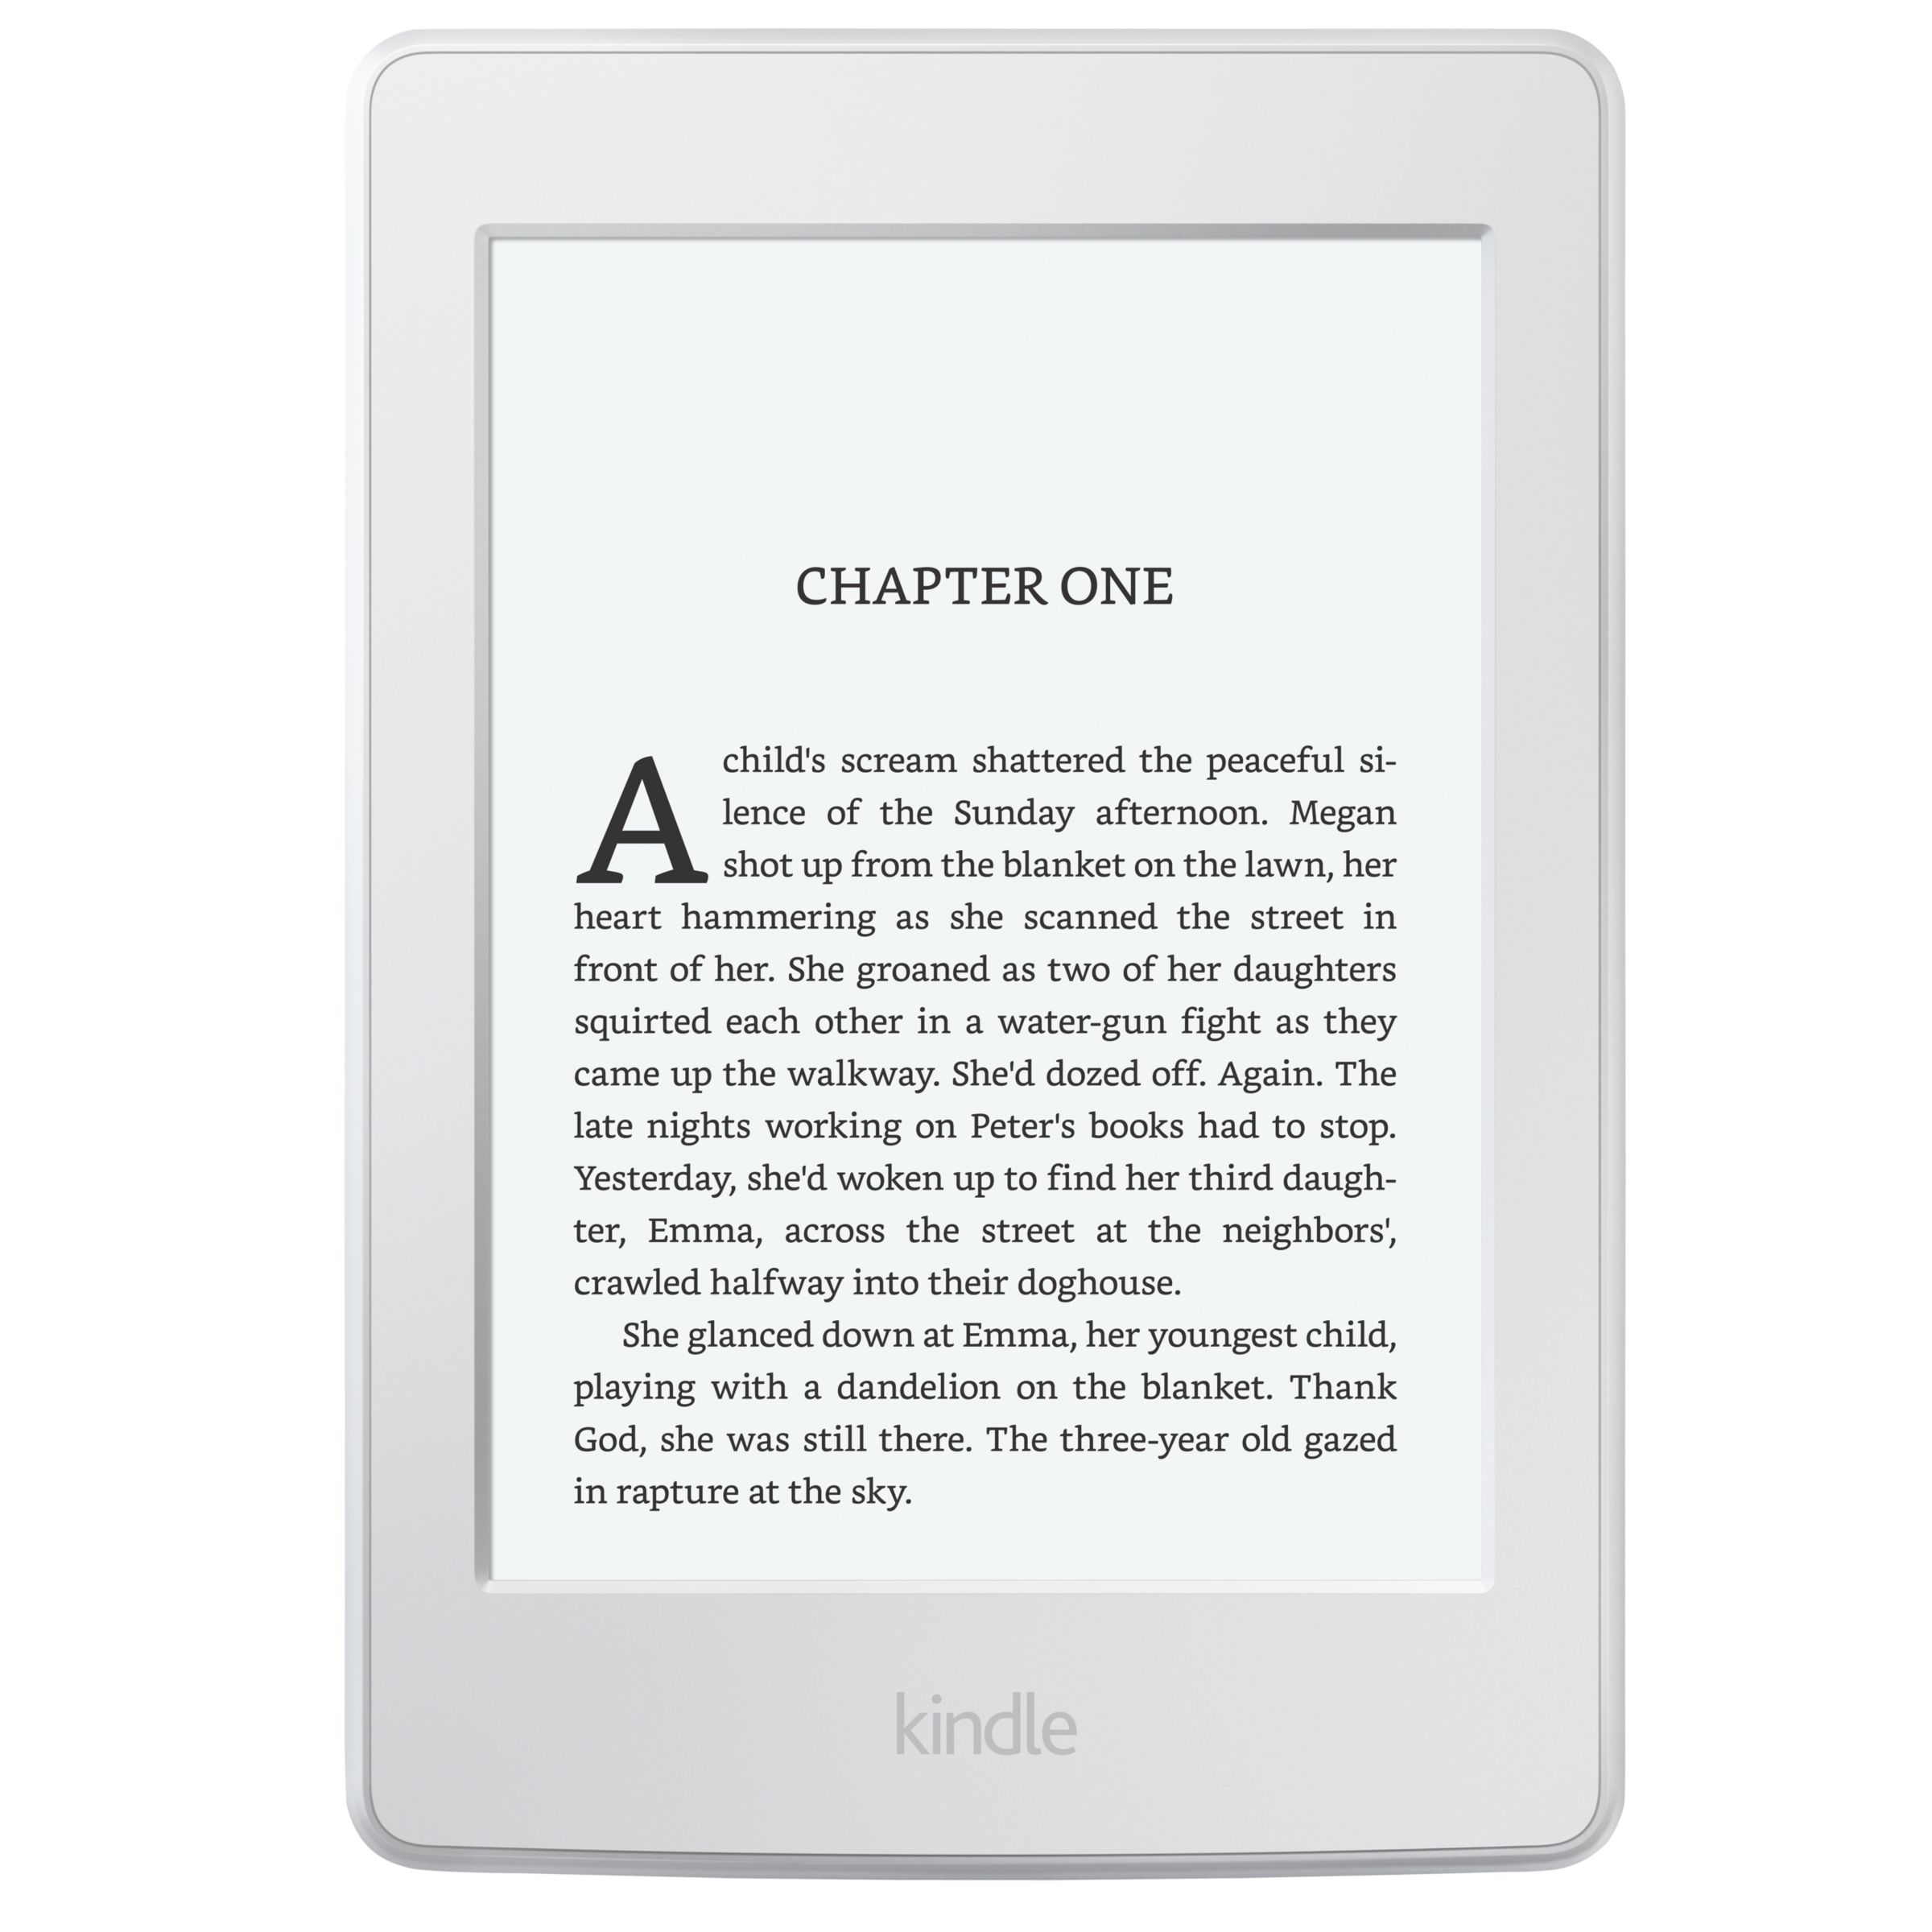 Amazon Kindle Paperwhite eReader, 6"High Resolution Illuminated Touch Screen, Wi-Fi